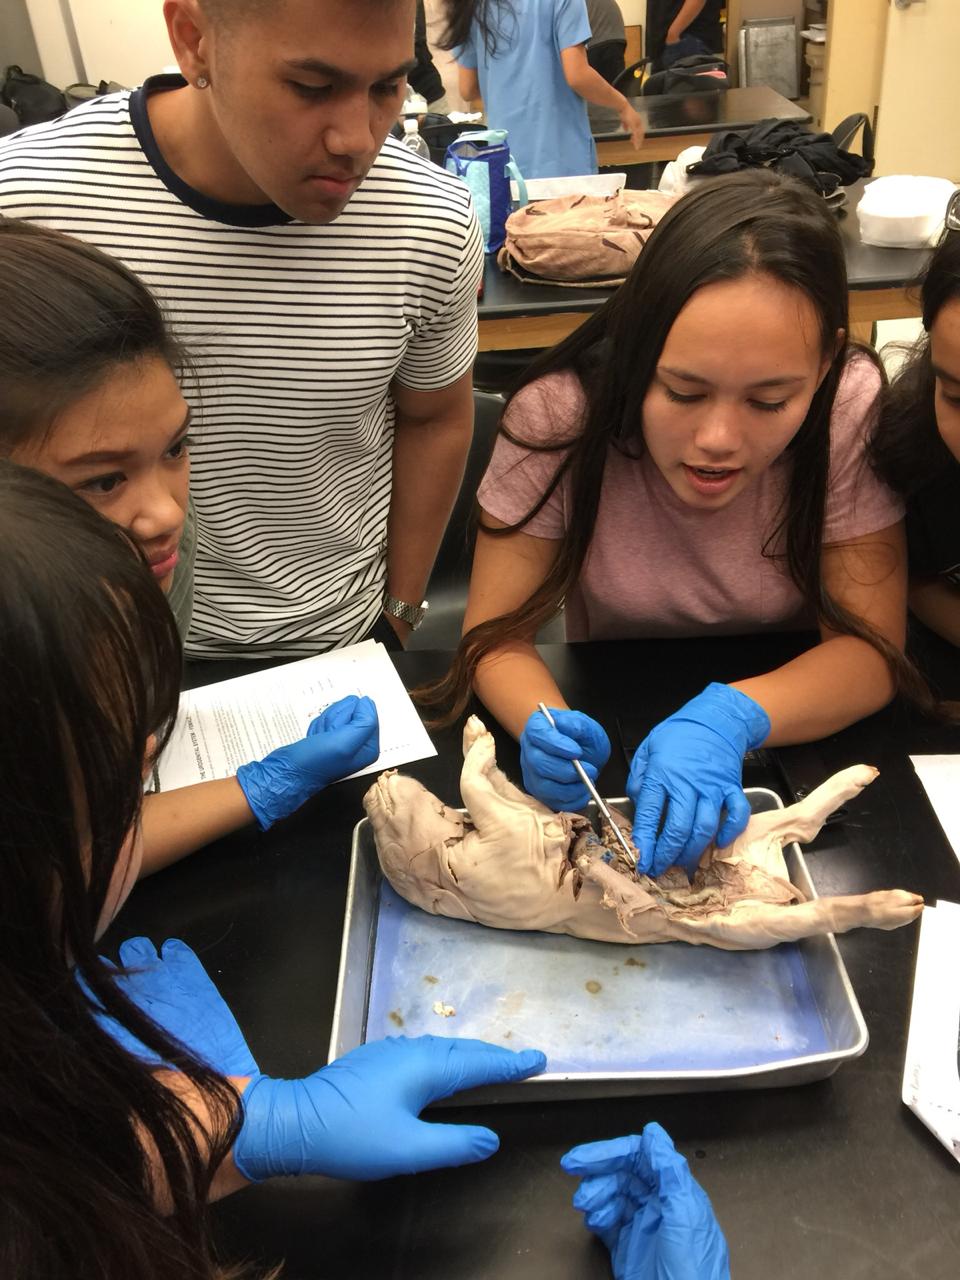 University of Guam student Colleen Naden dissects a fetal pig in her anatomy and physiology class while classmate Joel Oyrado looks on.